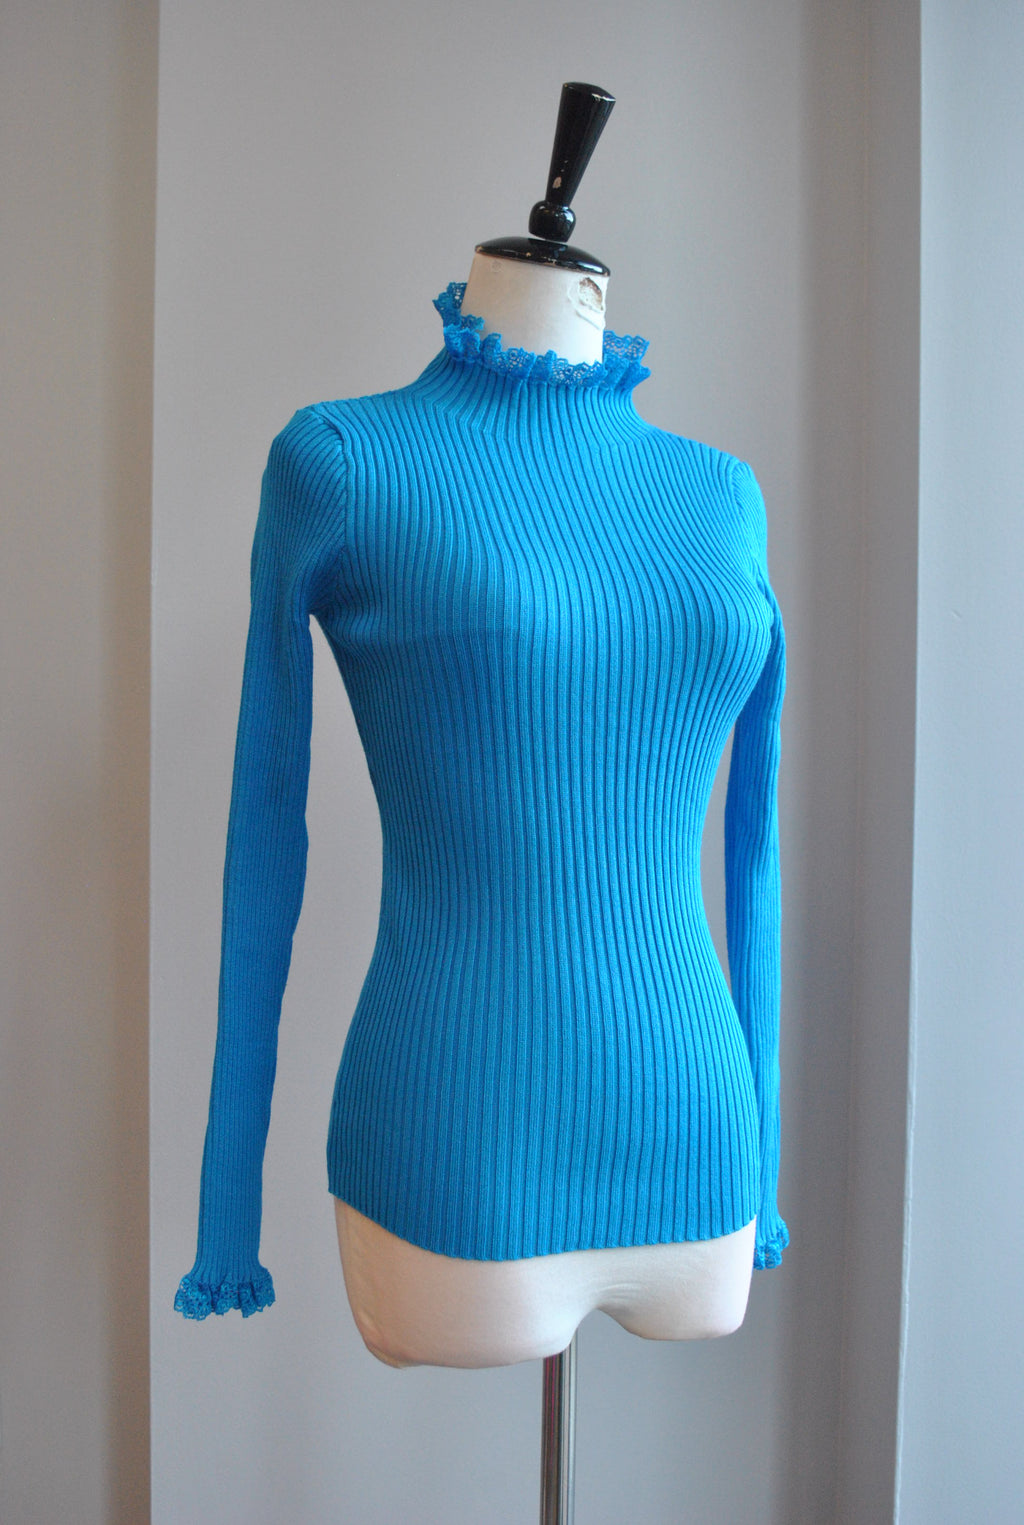 BLUE TURTLENECK STYLE SWEATER TOP WITH LACE